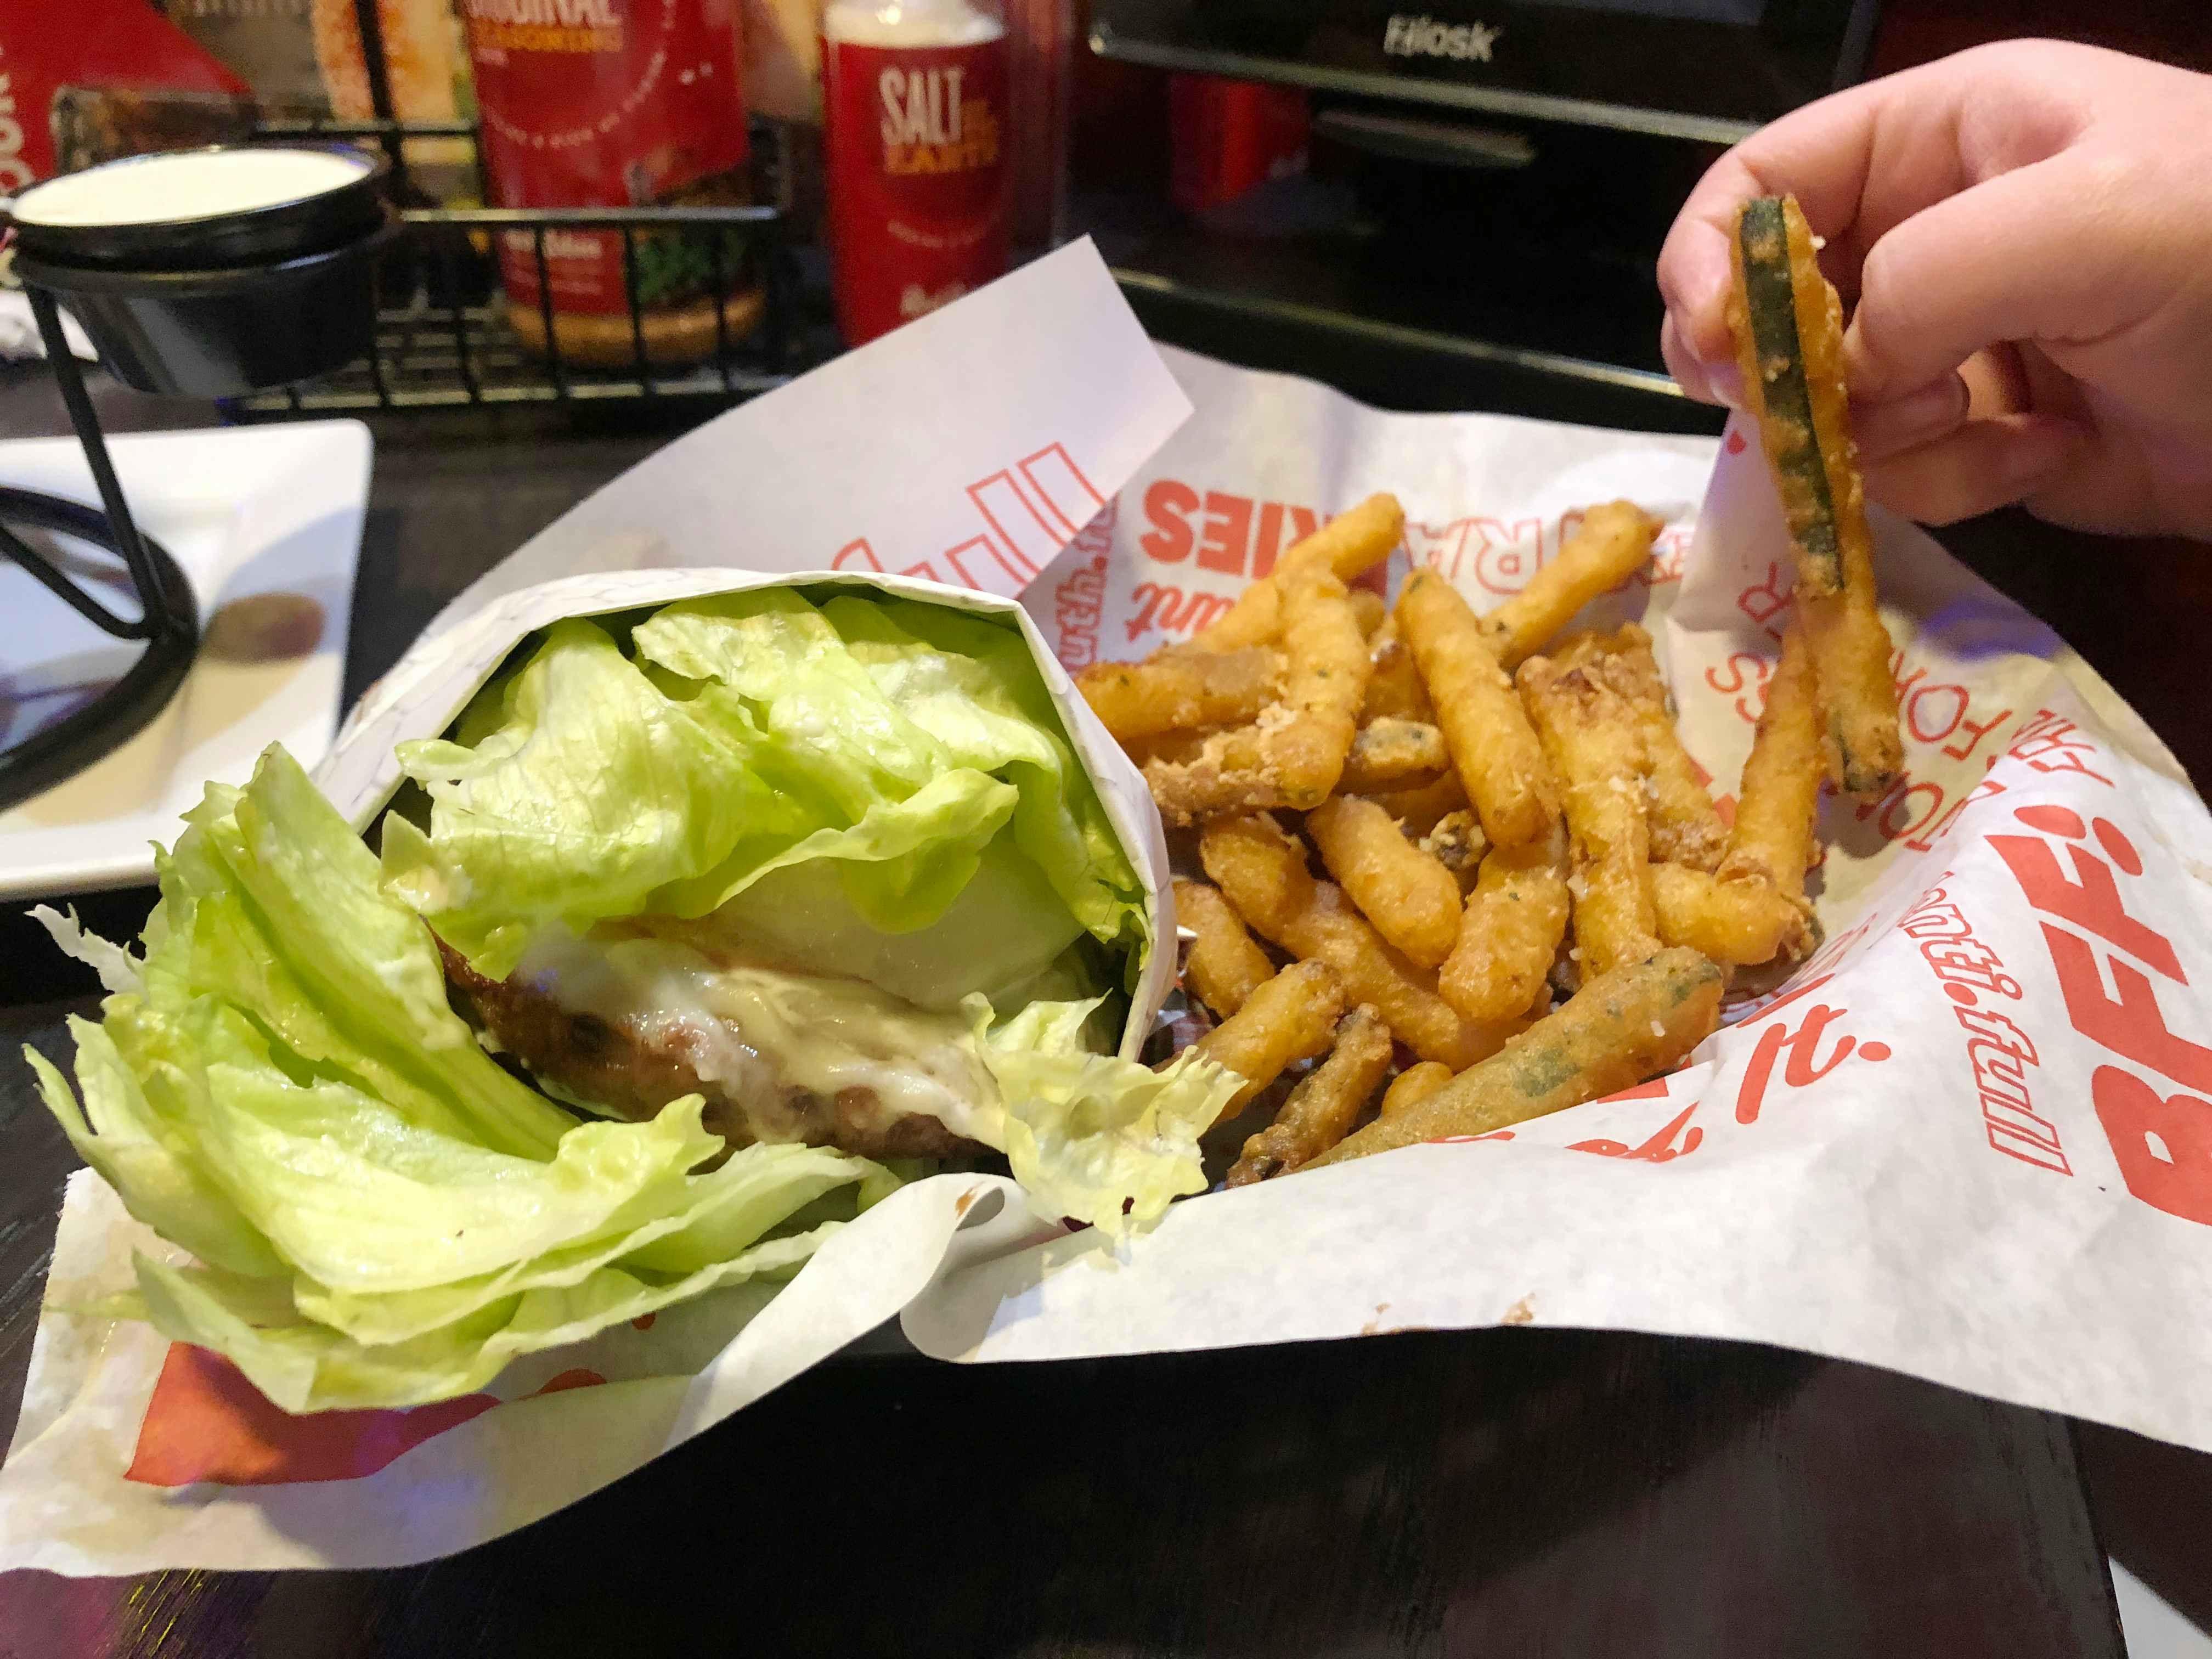 A person's hand taking a zucchini fry from a basket of a lettuce wrapped burger and zucchini fries at Red Robin.